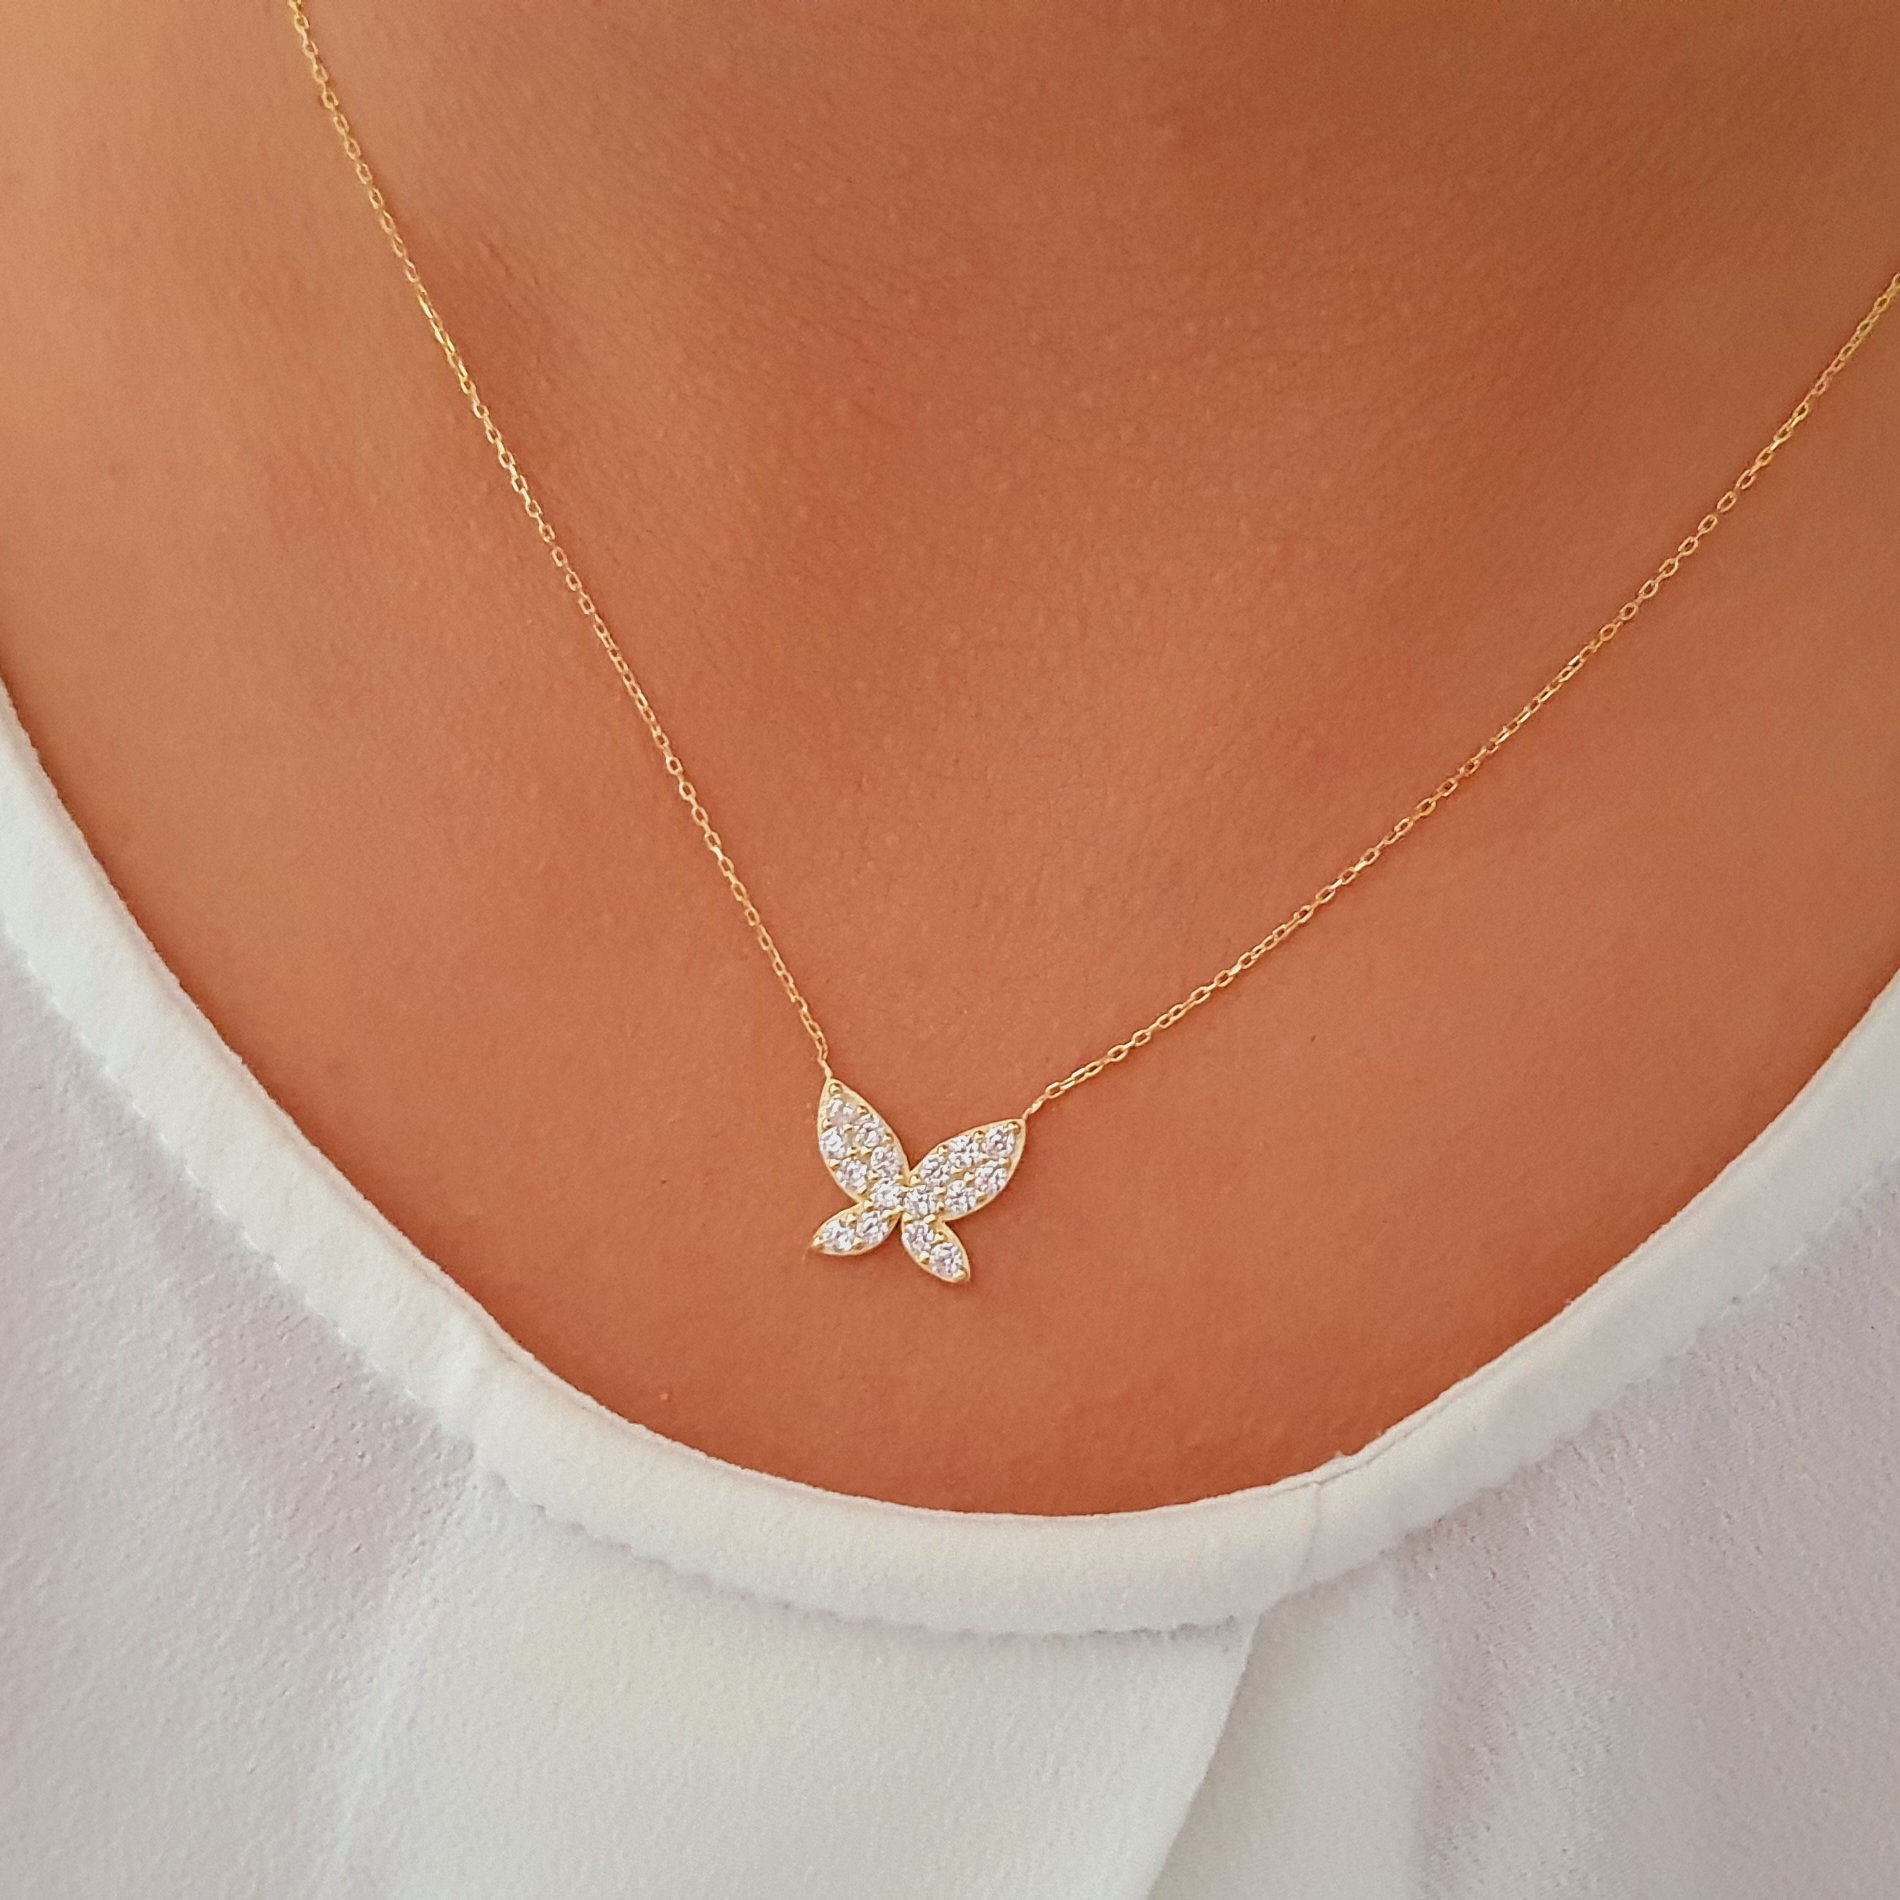 Mini Butterfly Necklace With Diamonds - KAMARIA